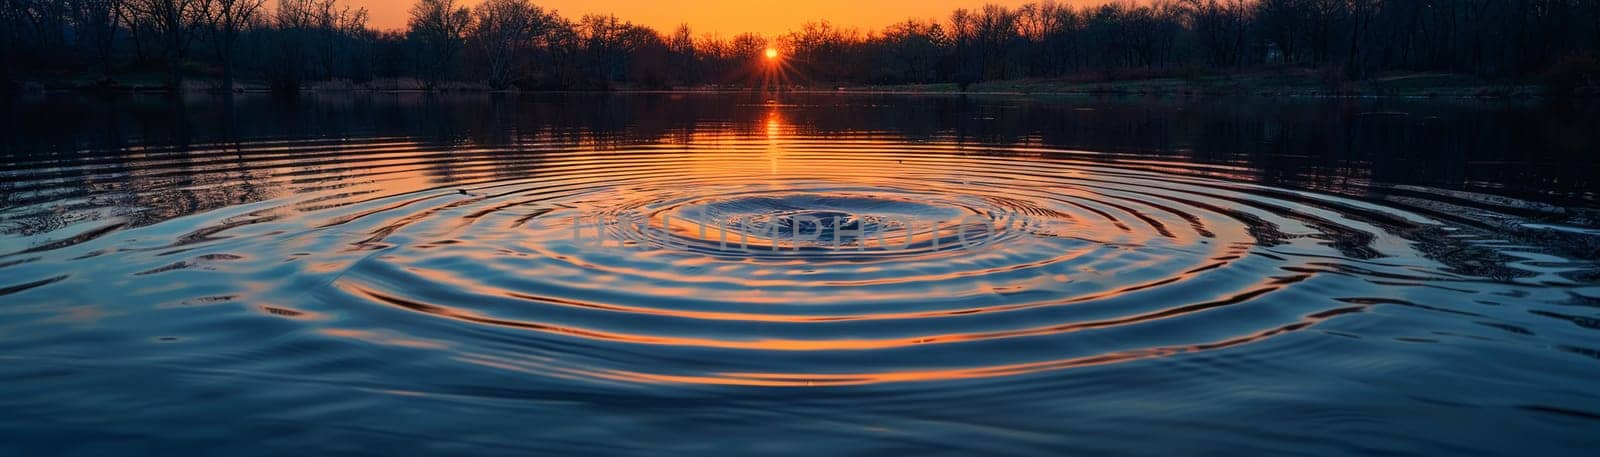 Ripples Across a Quiet Pond at Twilight Circles blurring on the waters surface by Benzoix